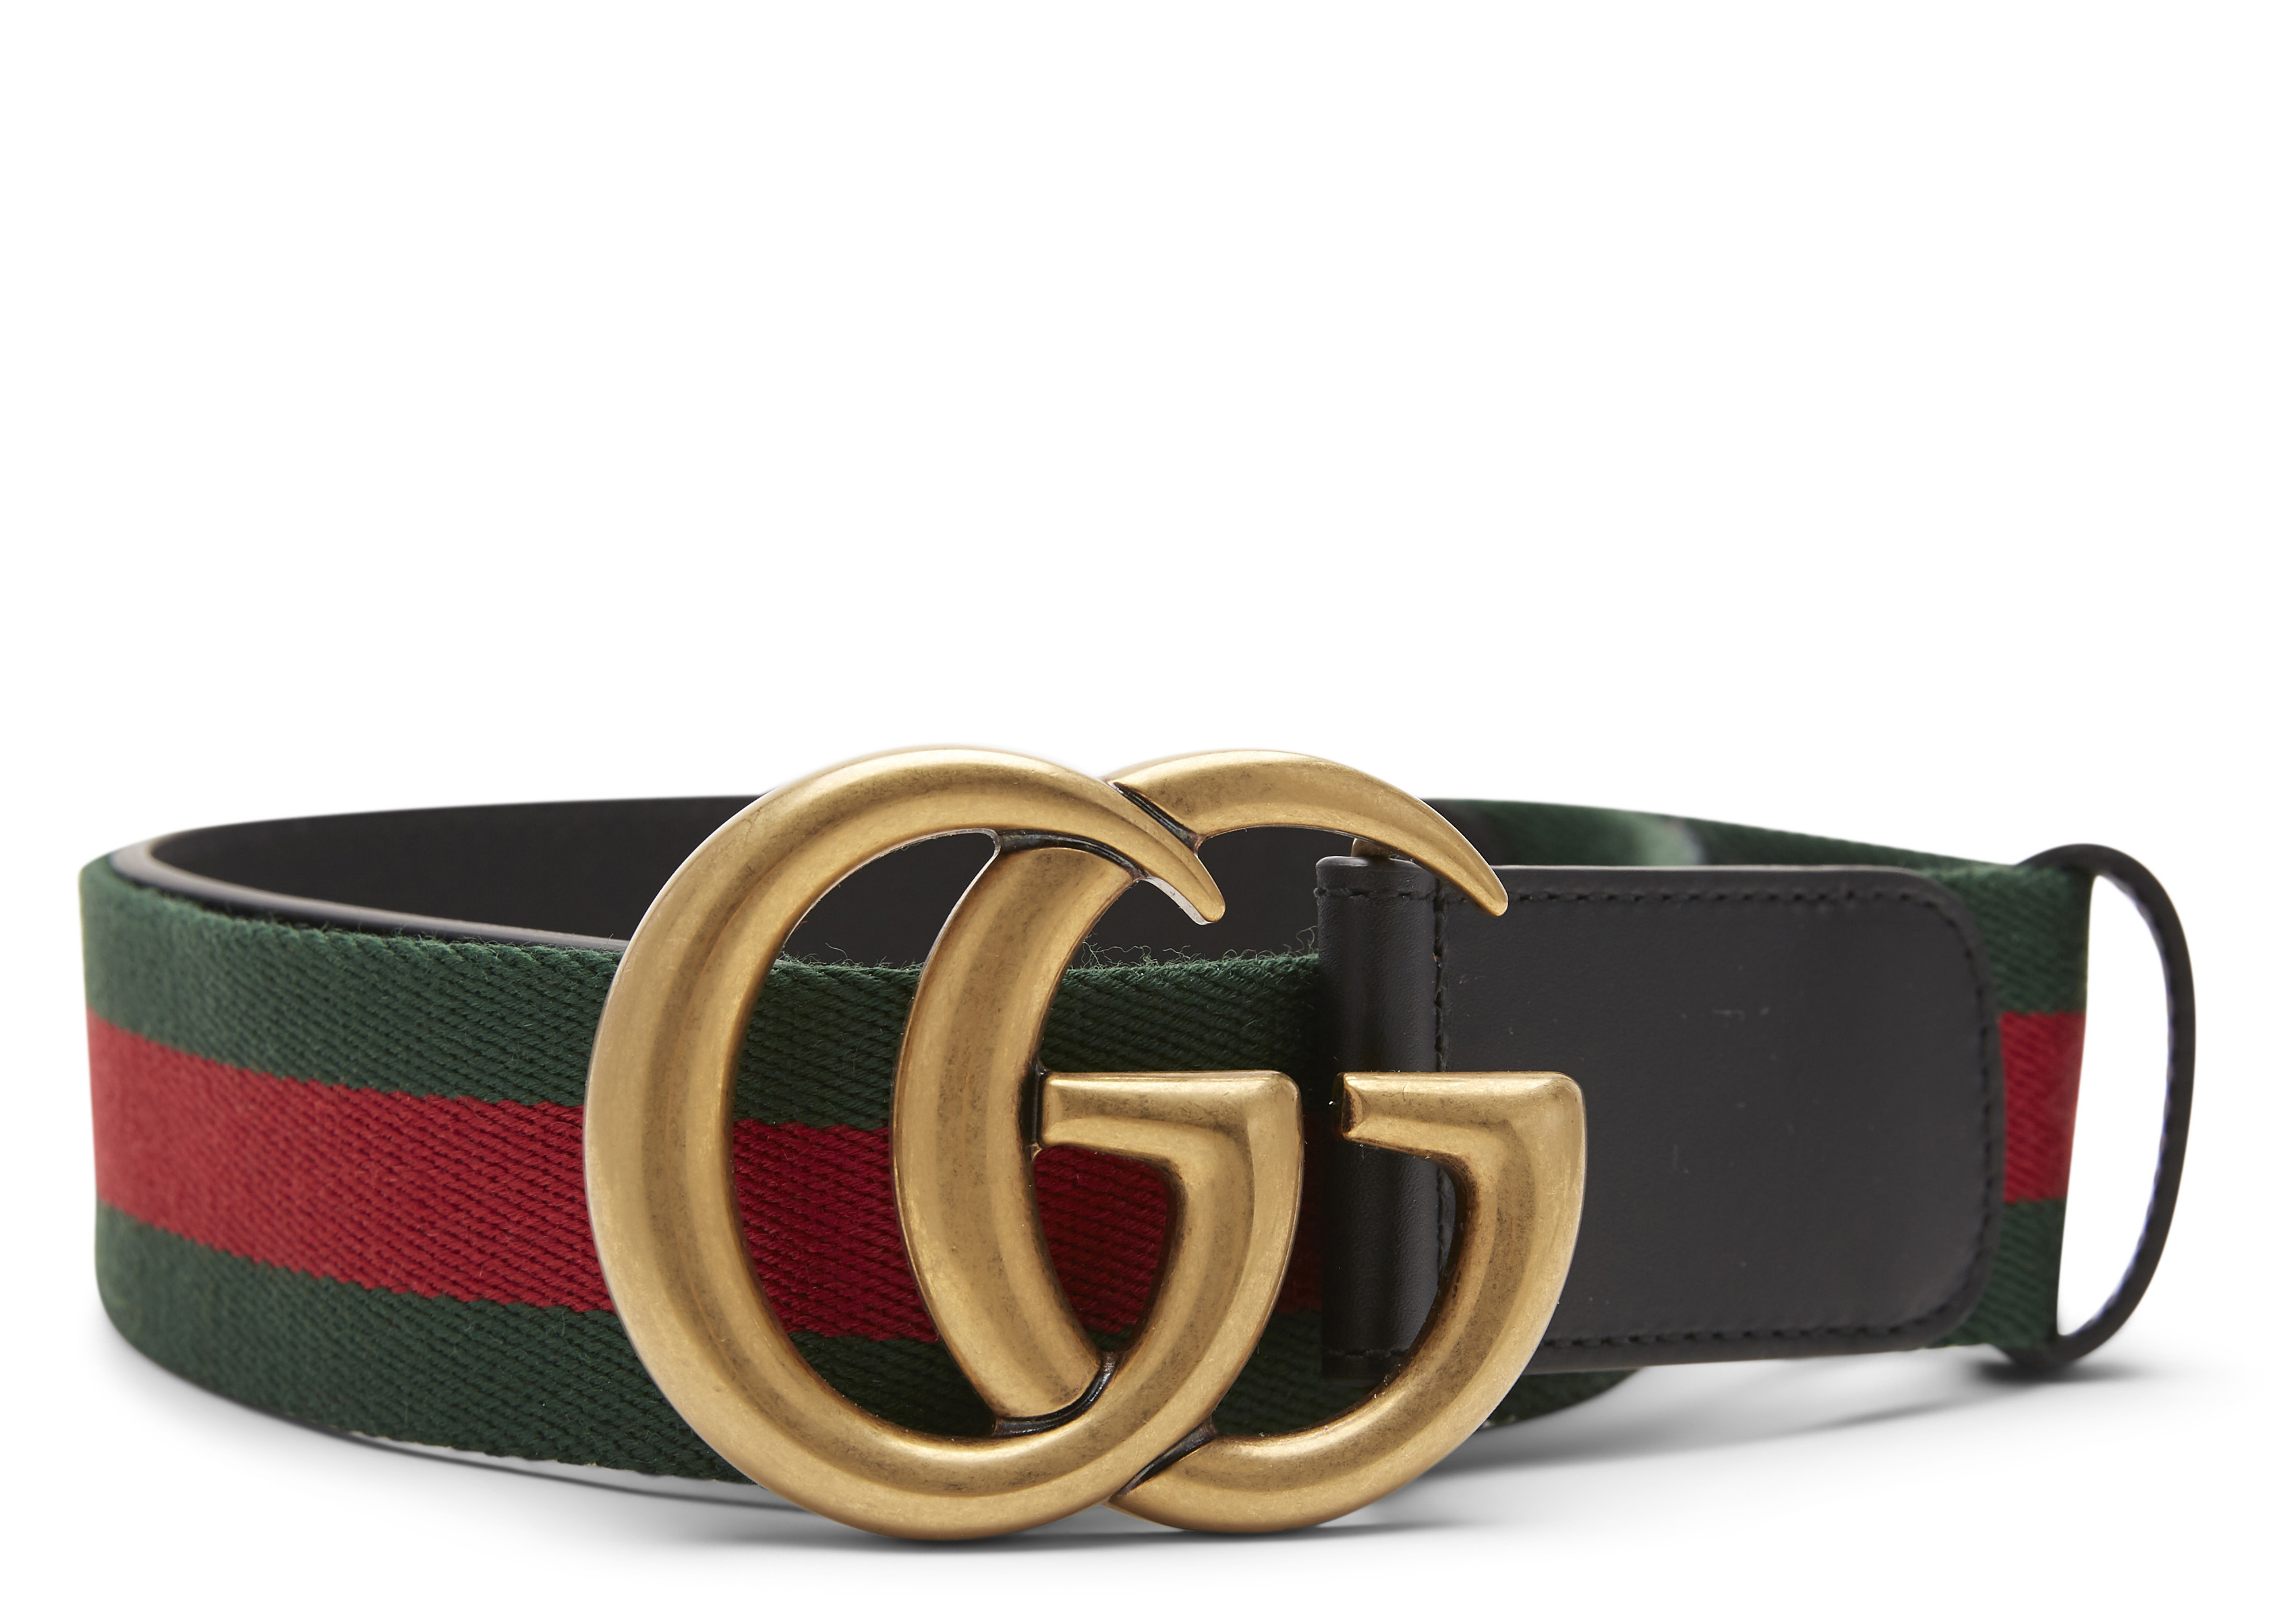 red black and green gucci belt